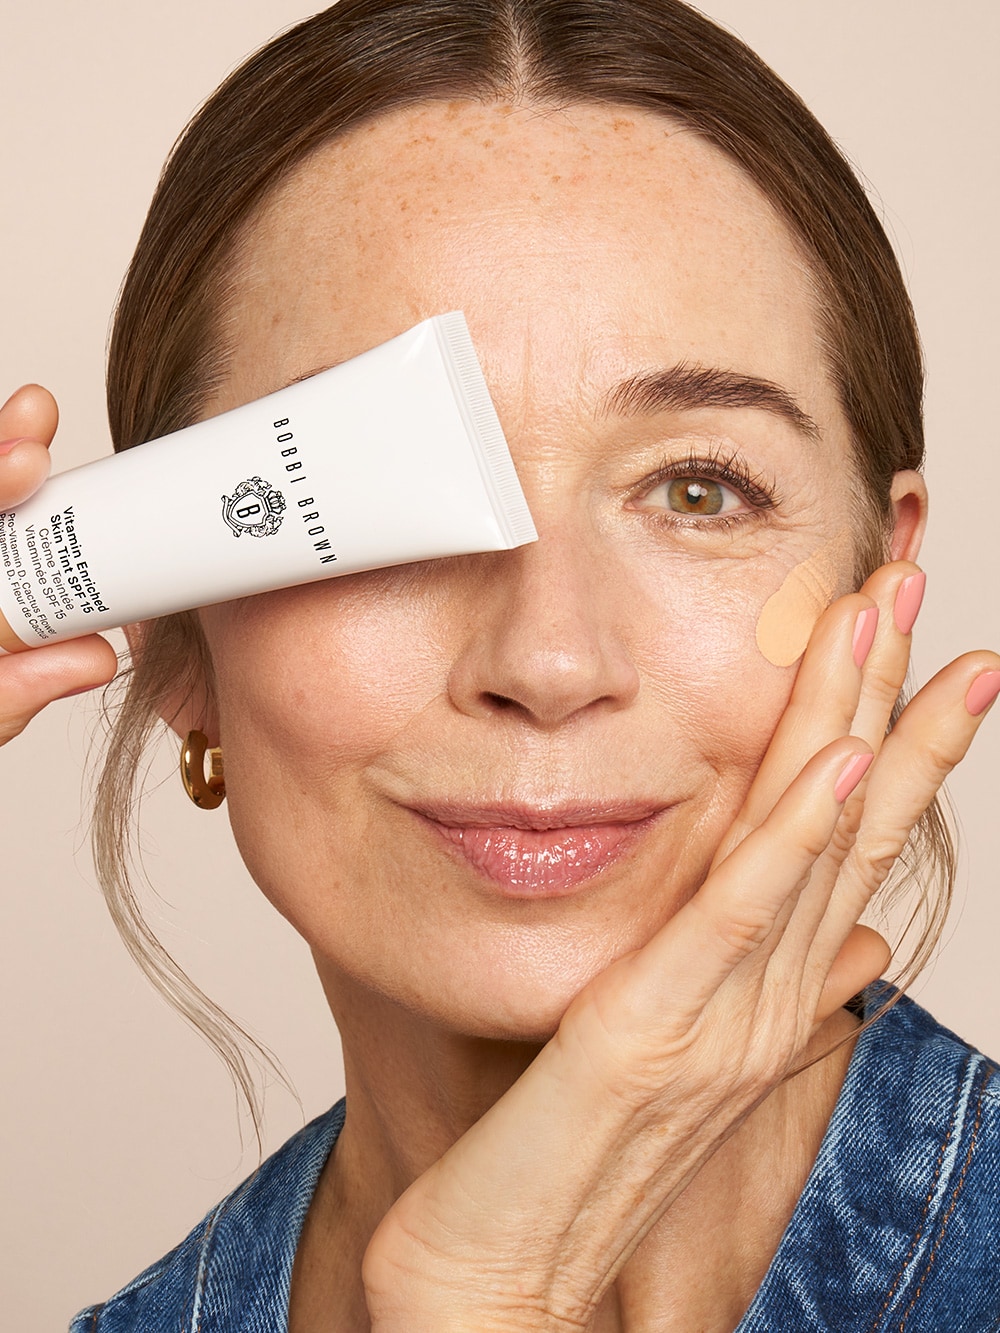 Mature model playfully covering one eye with new Vitamin Enriched Skin Tint, in front of a bright yellow background